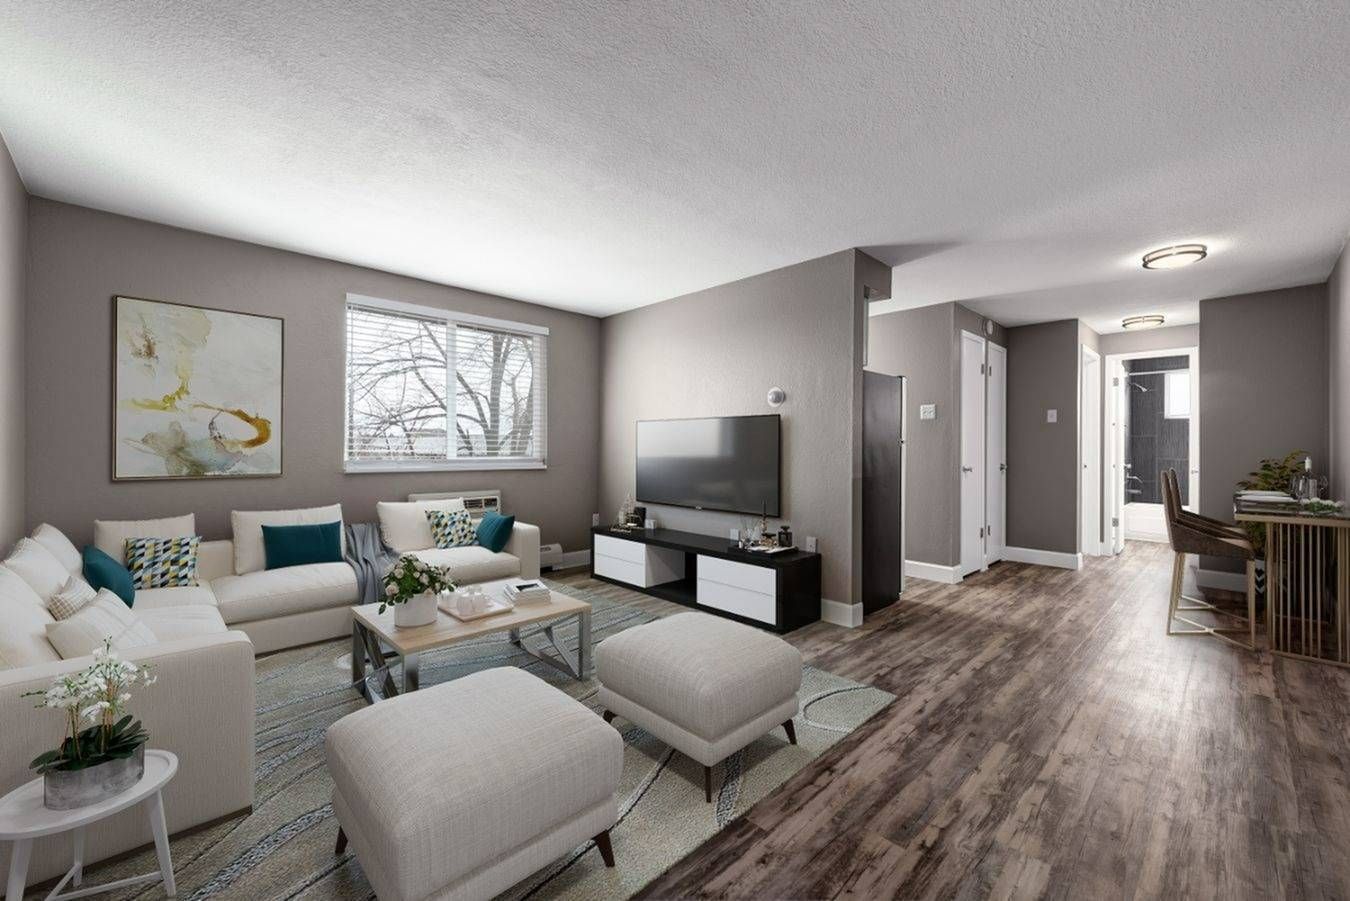 Spacious apartment living room at Southglenn Place.